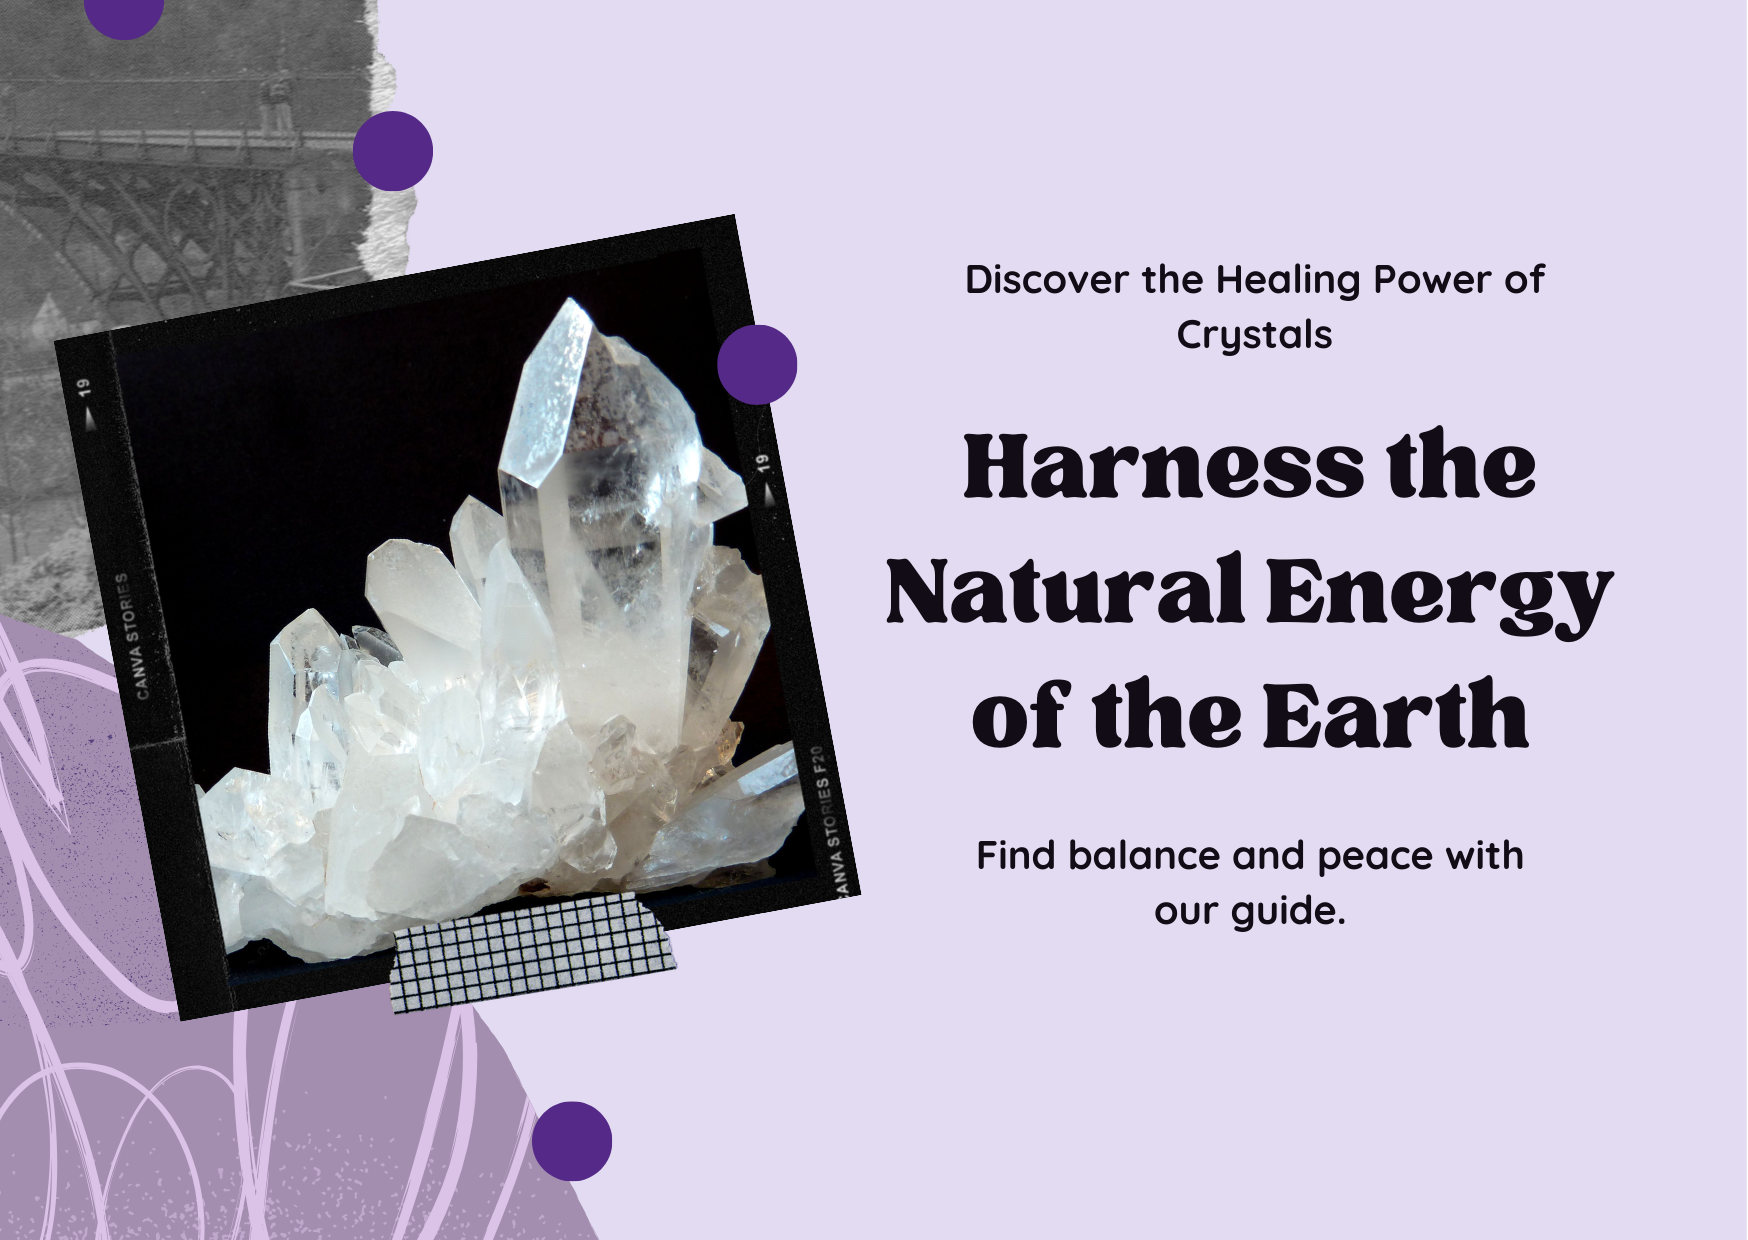 Healing Power Of Crystals Information Card